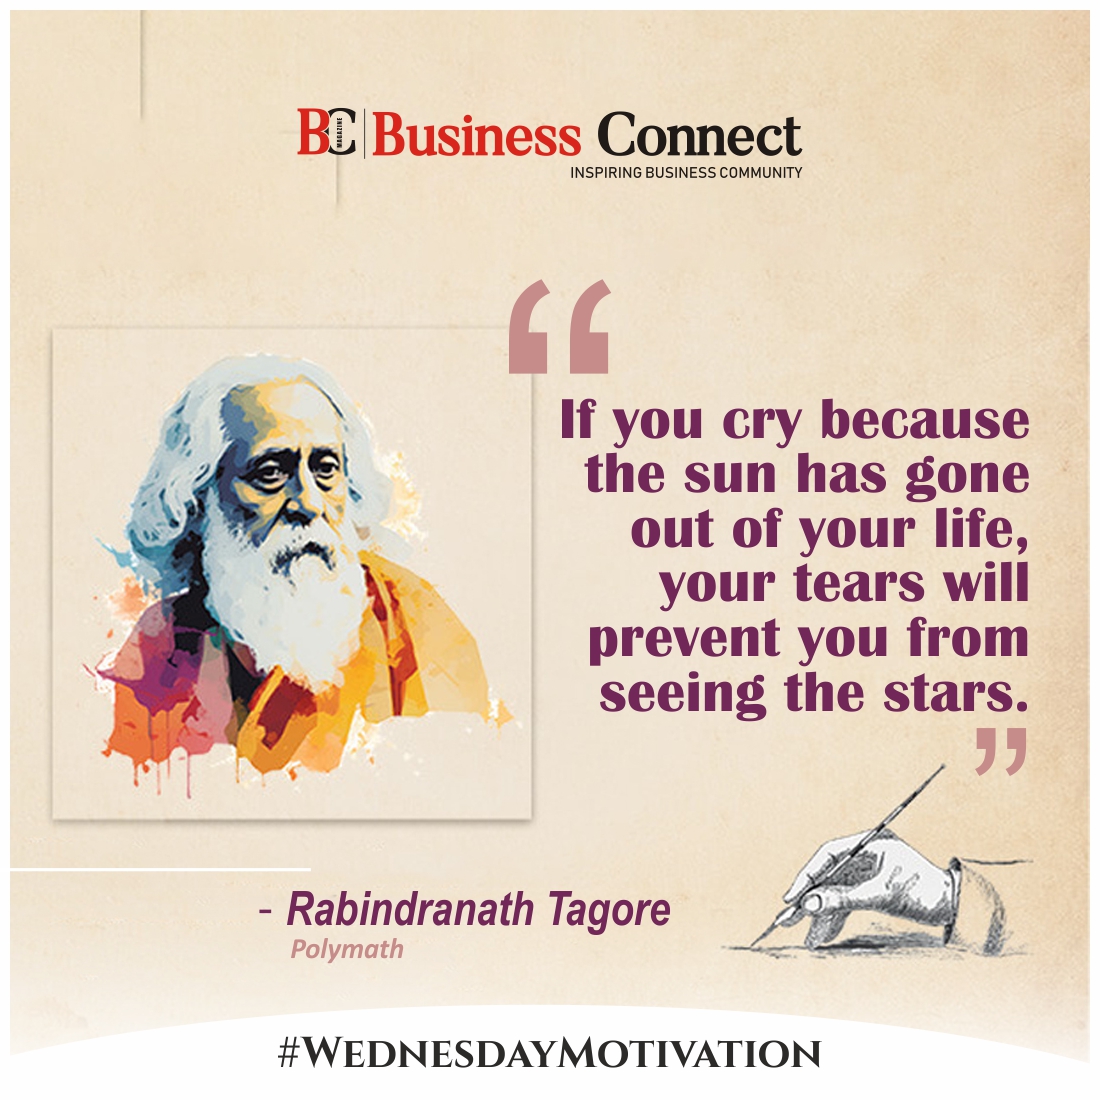 “If you cry because the sun has gone out of your life, your tears will prevent you from seeing the stars.” ― Rabindranath Tagore #RabindranathTagore #RabindranathTagoreJayanti #wedneday #quote #rabindranathtagorequote #quotes #quotesoftheday #quotesdaily #motivationquote #today